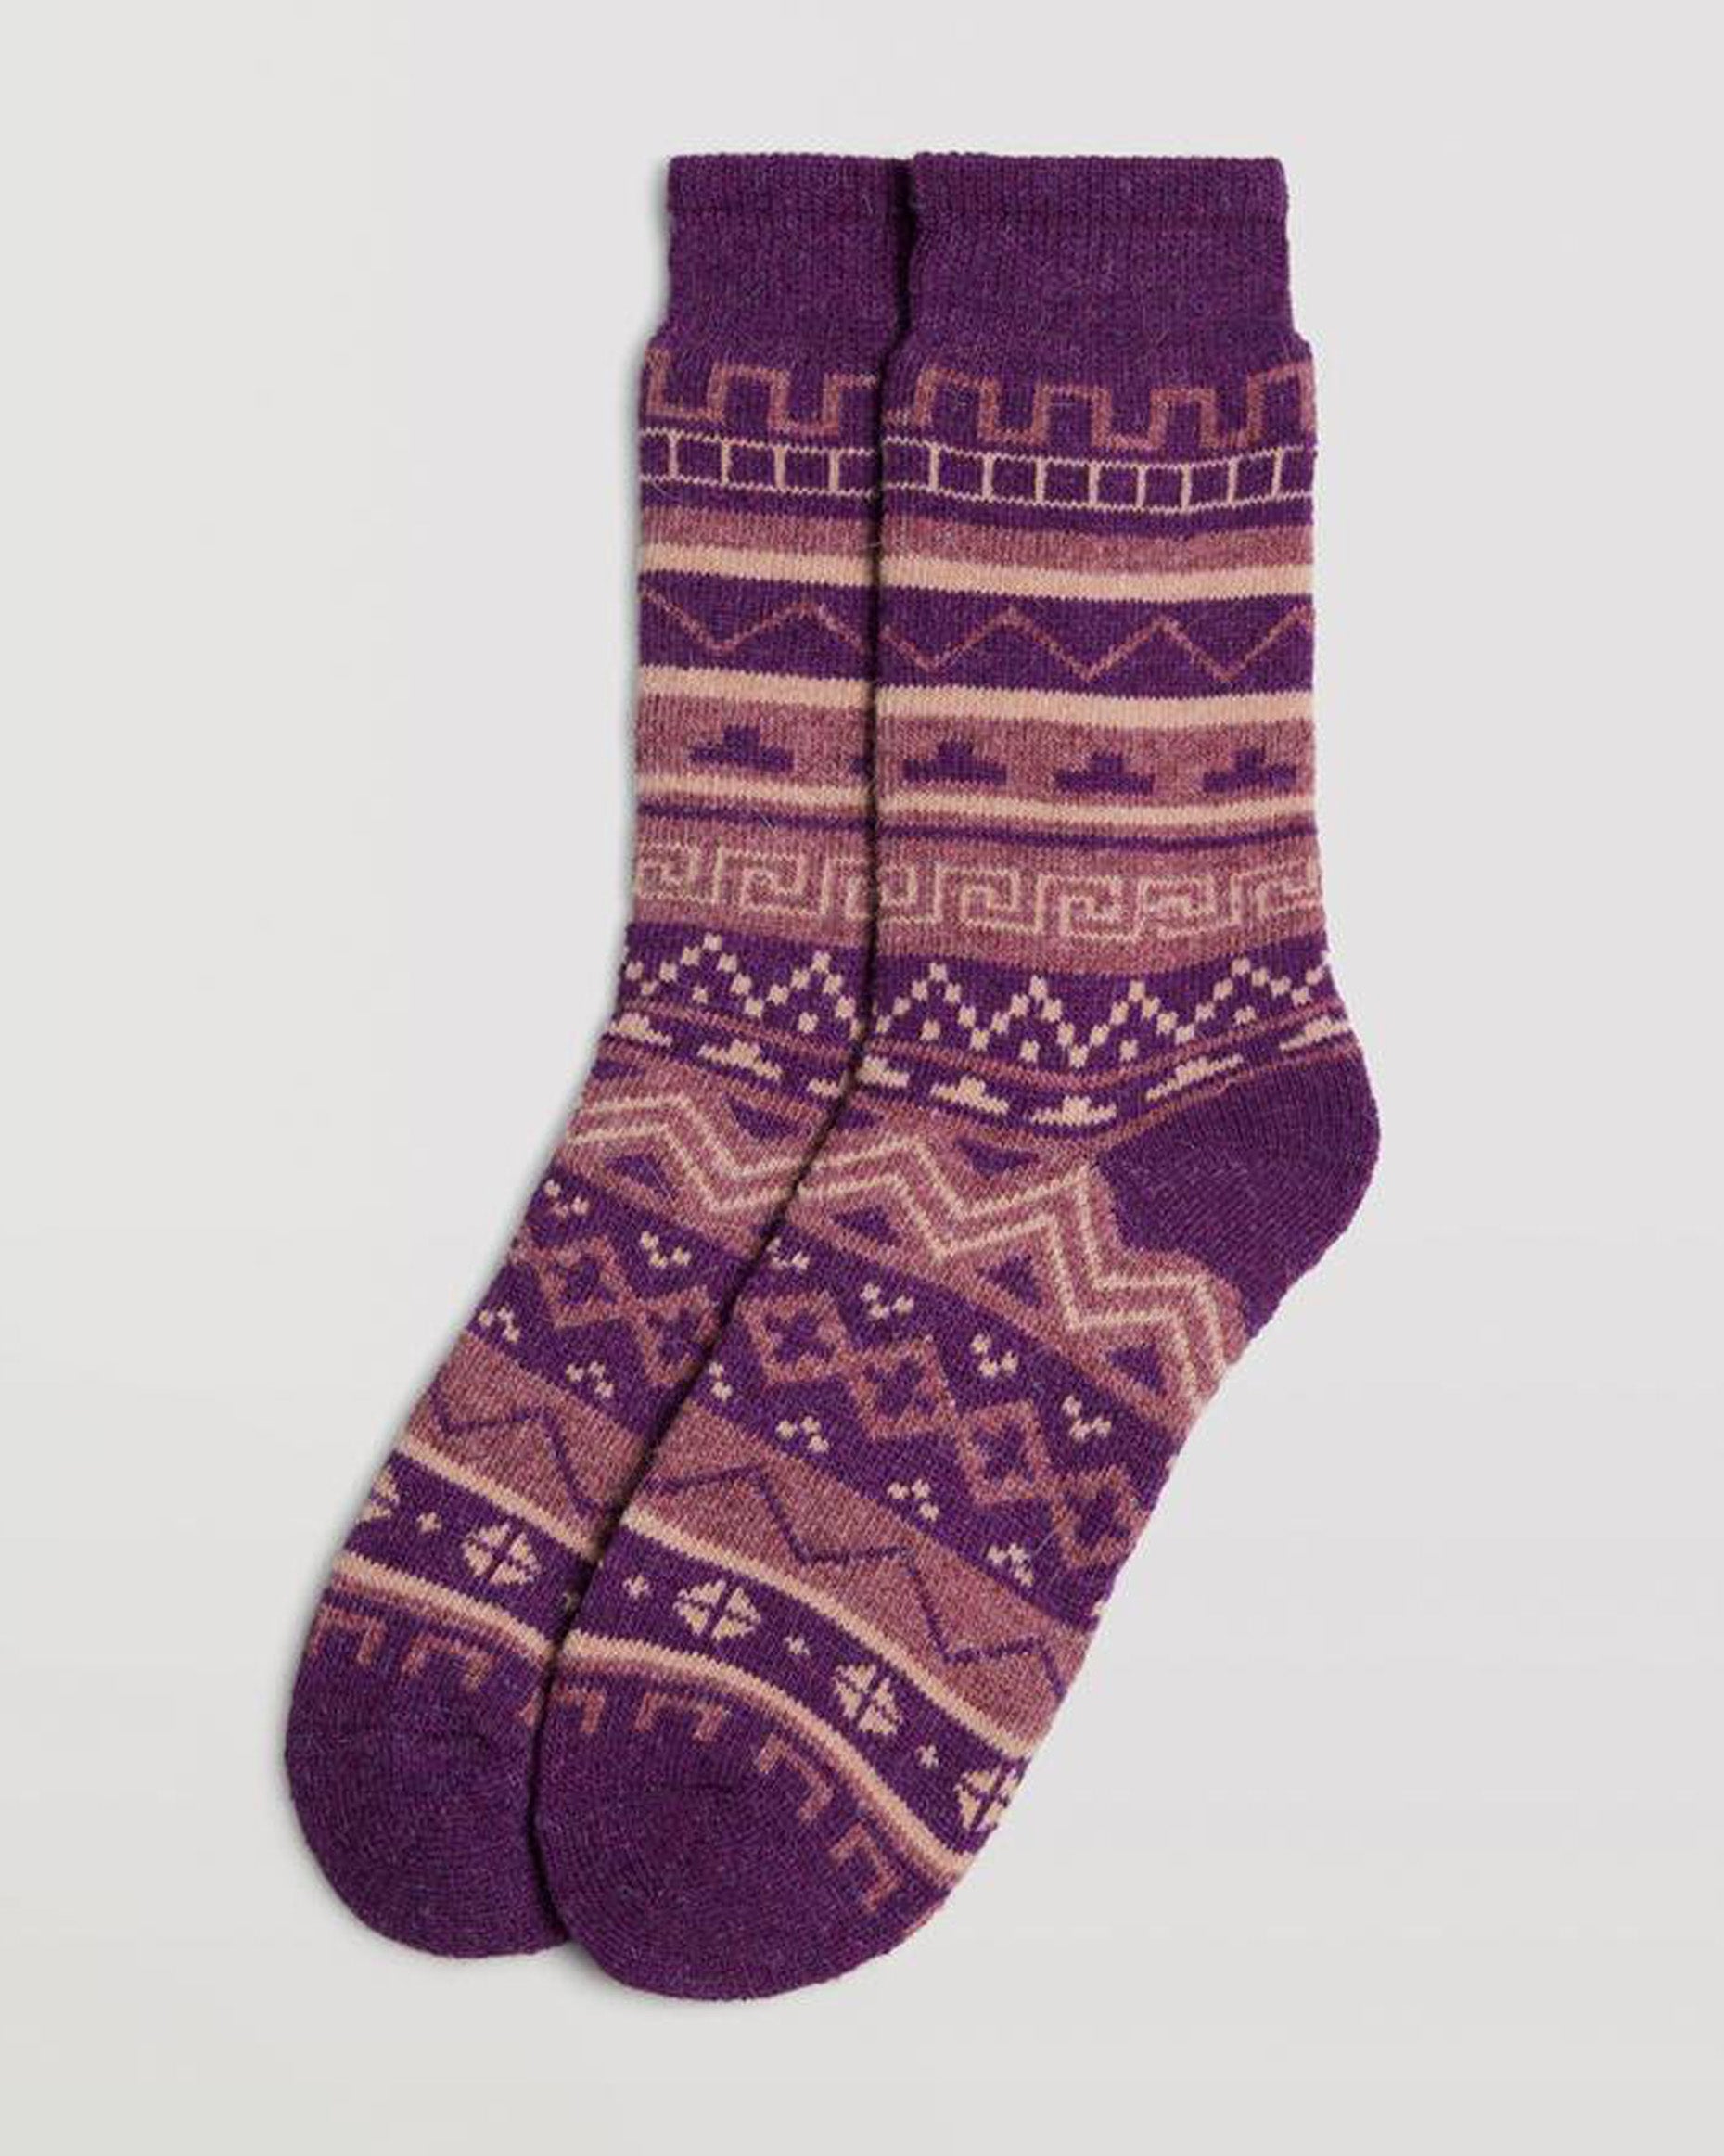 Ysabel Mora 12888 Aztec Socks - Purple warm wool and angora mix thermal socks with an Aztec style pattern in shades of pale pink.